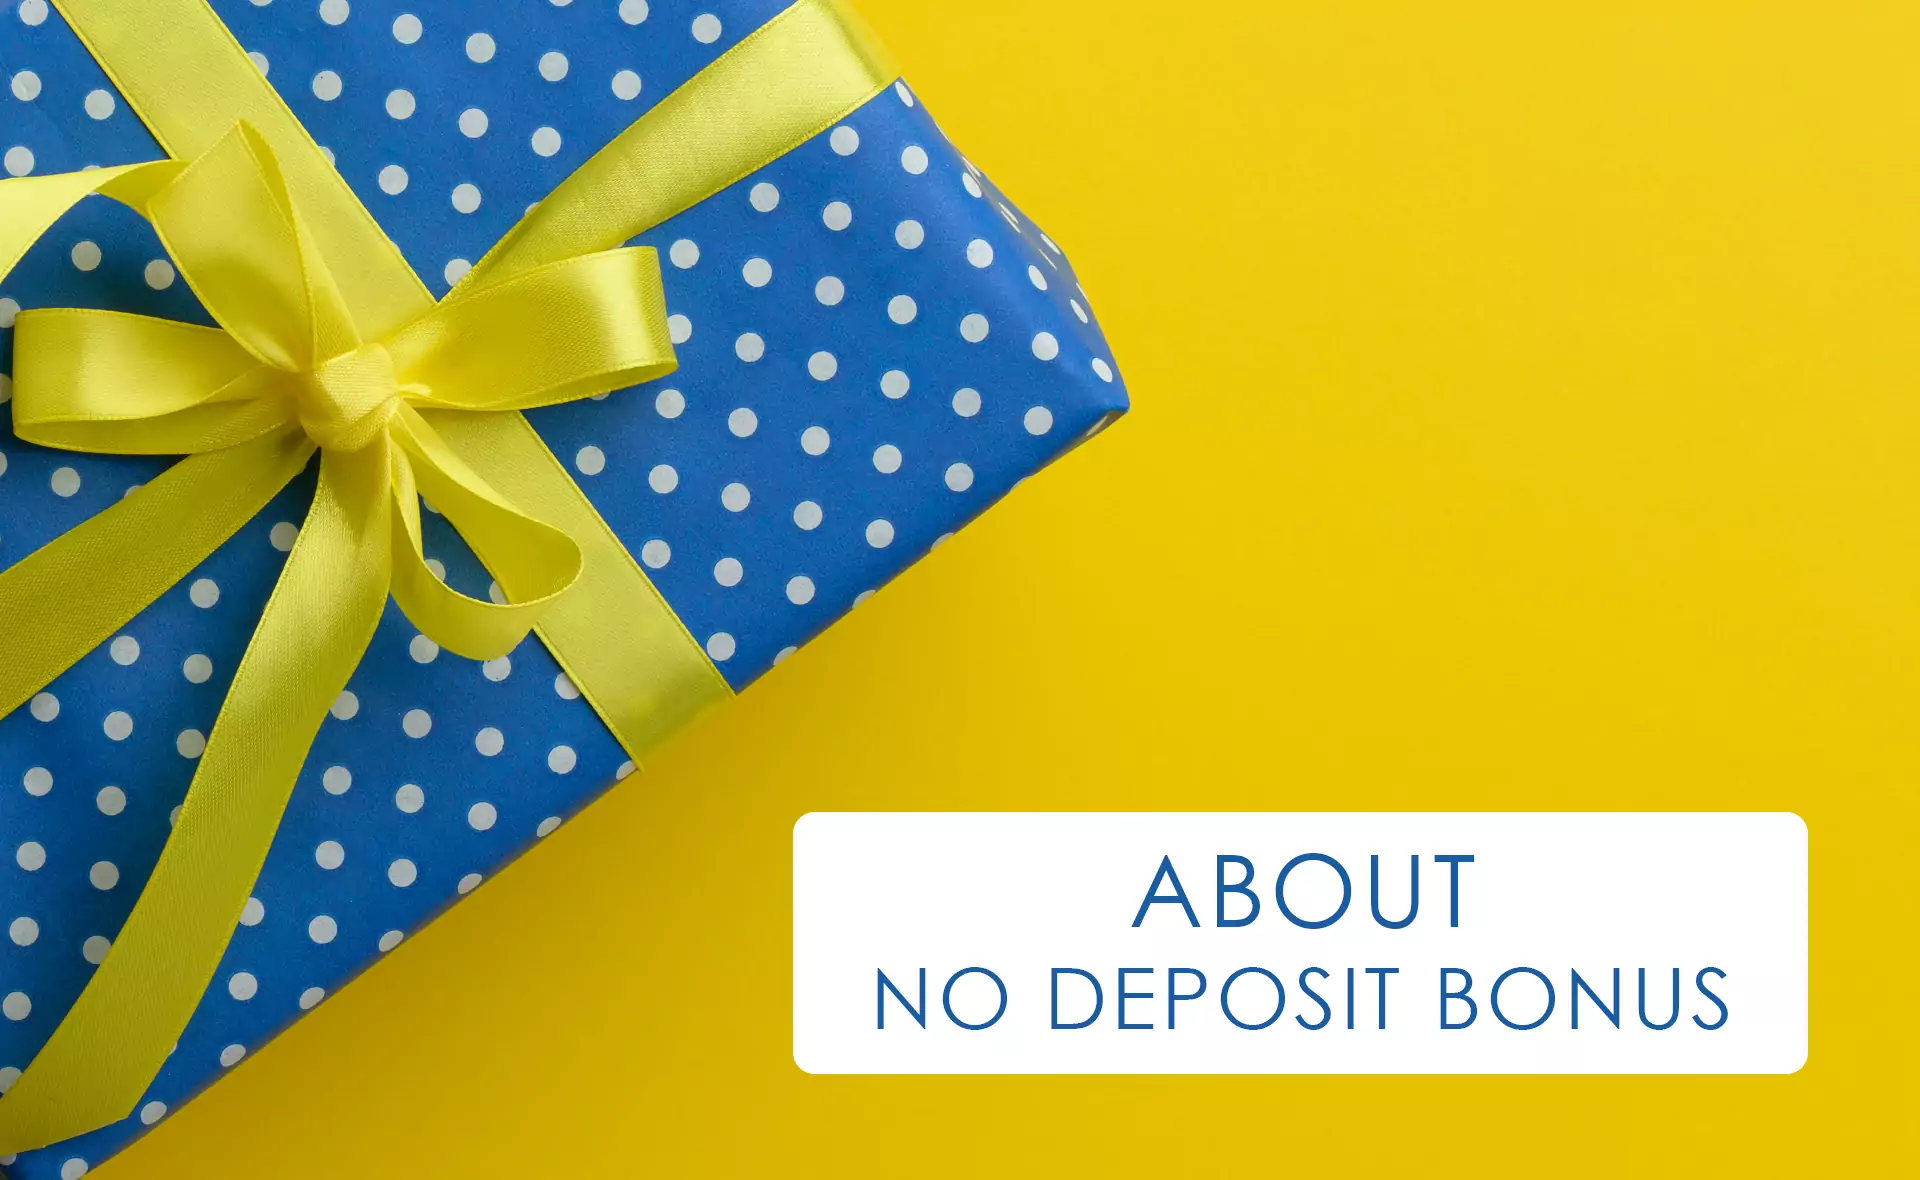 No deposit bonus is a perfect chance for newcomers to try placing bets and playing casino games.